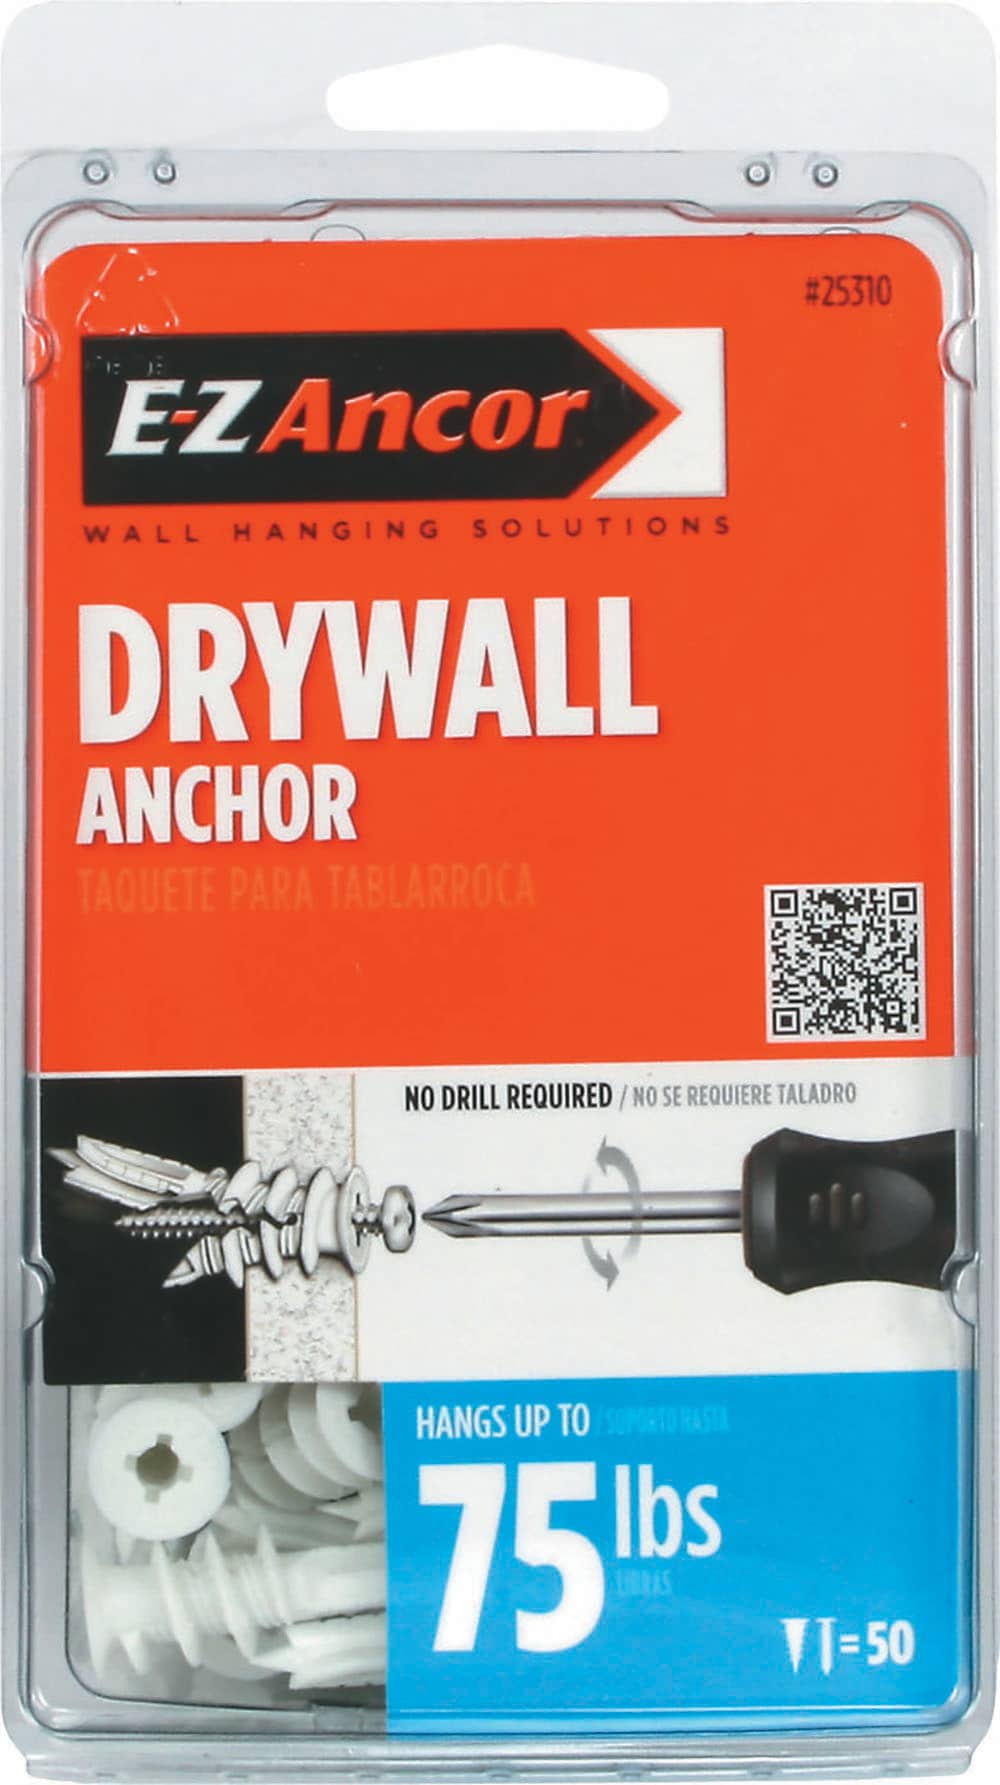 Drywall Anchors, Best Drywall Anchors For Floating Shelves